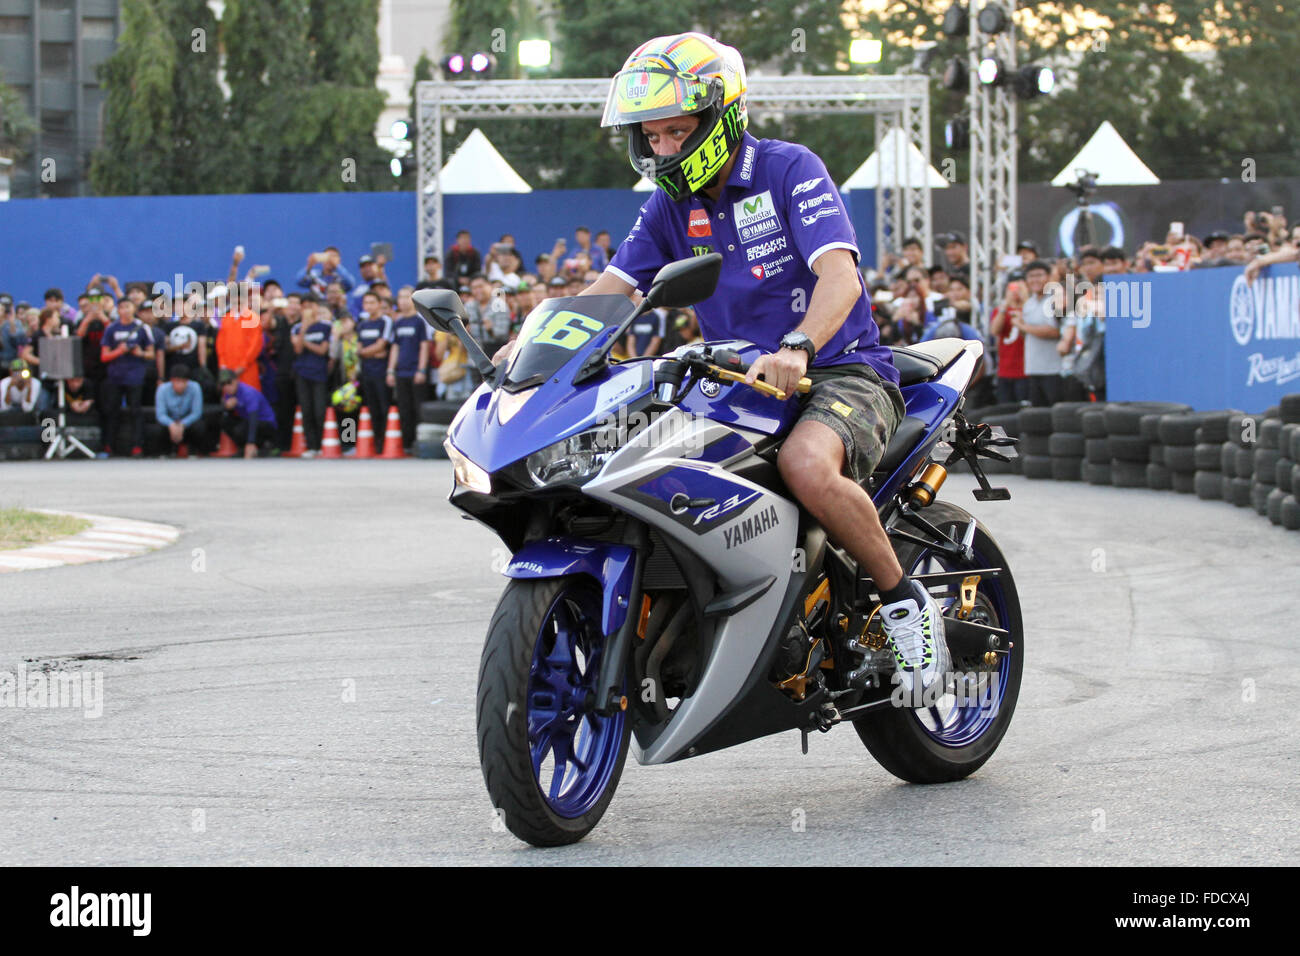 Bangkok, Thailand. 30th Jan, 2016. Valentino Rossi riding a motorcycle,  show and shake hand his fans during Yamaha motor Thailand organized for Valentino  Rossi fan Club Moto GP World Champion Professional version